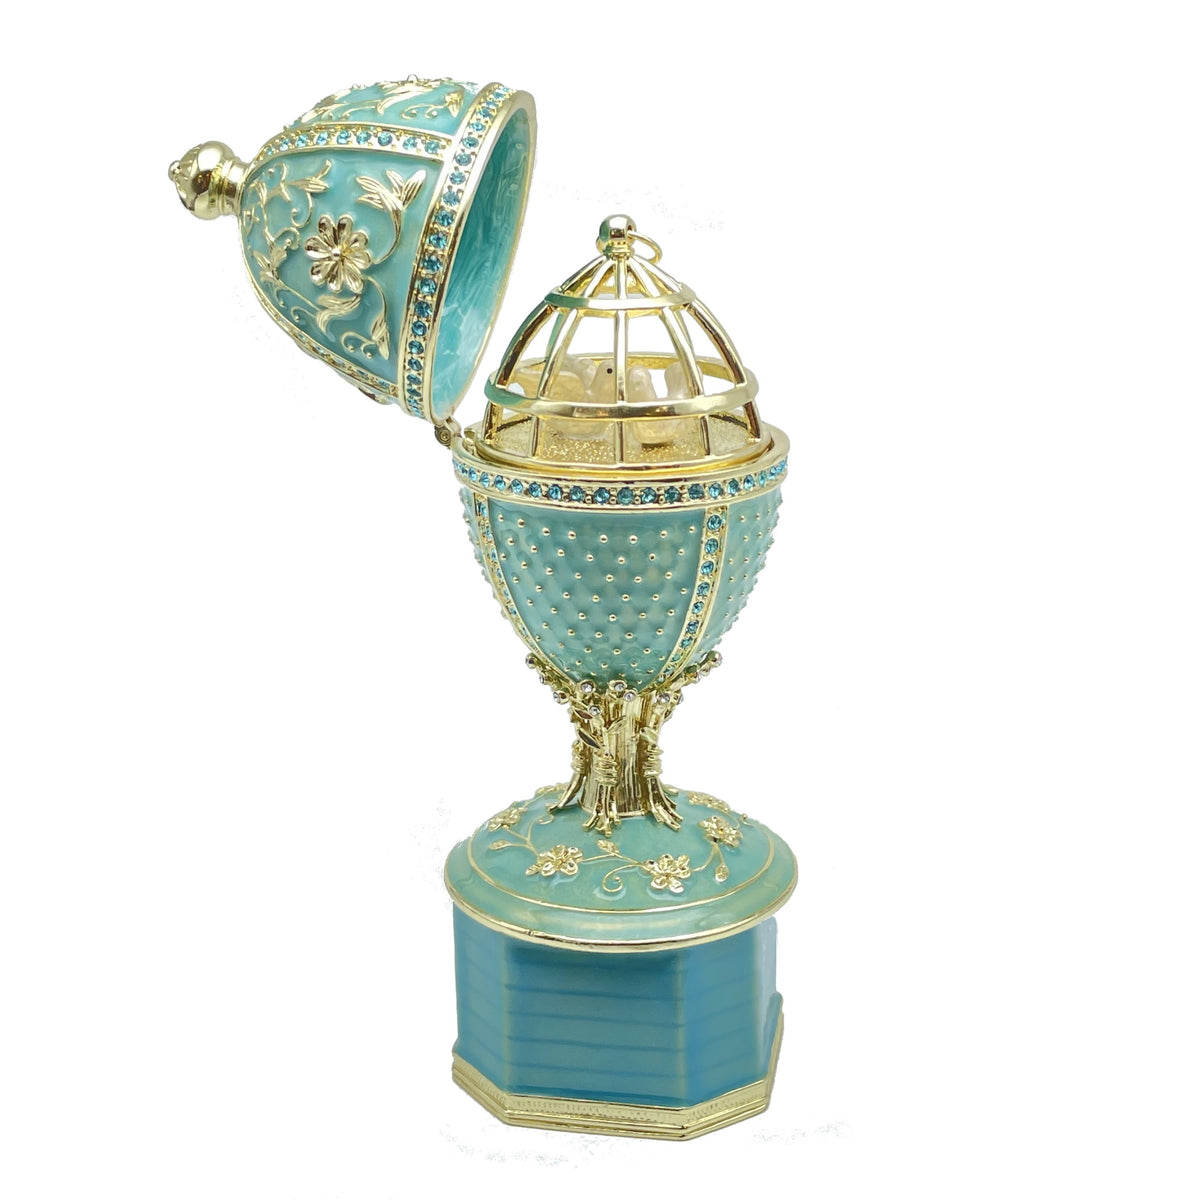 Limited edition Green turquoise Faberge Egg with doves trinket box